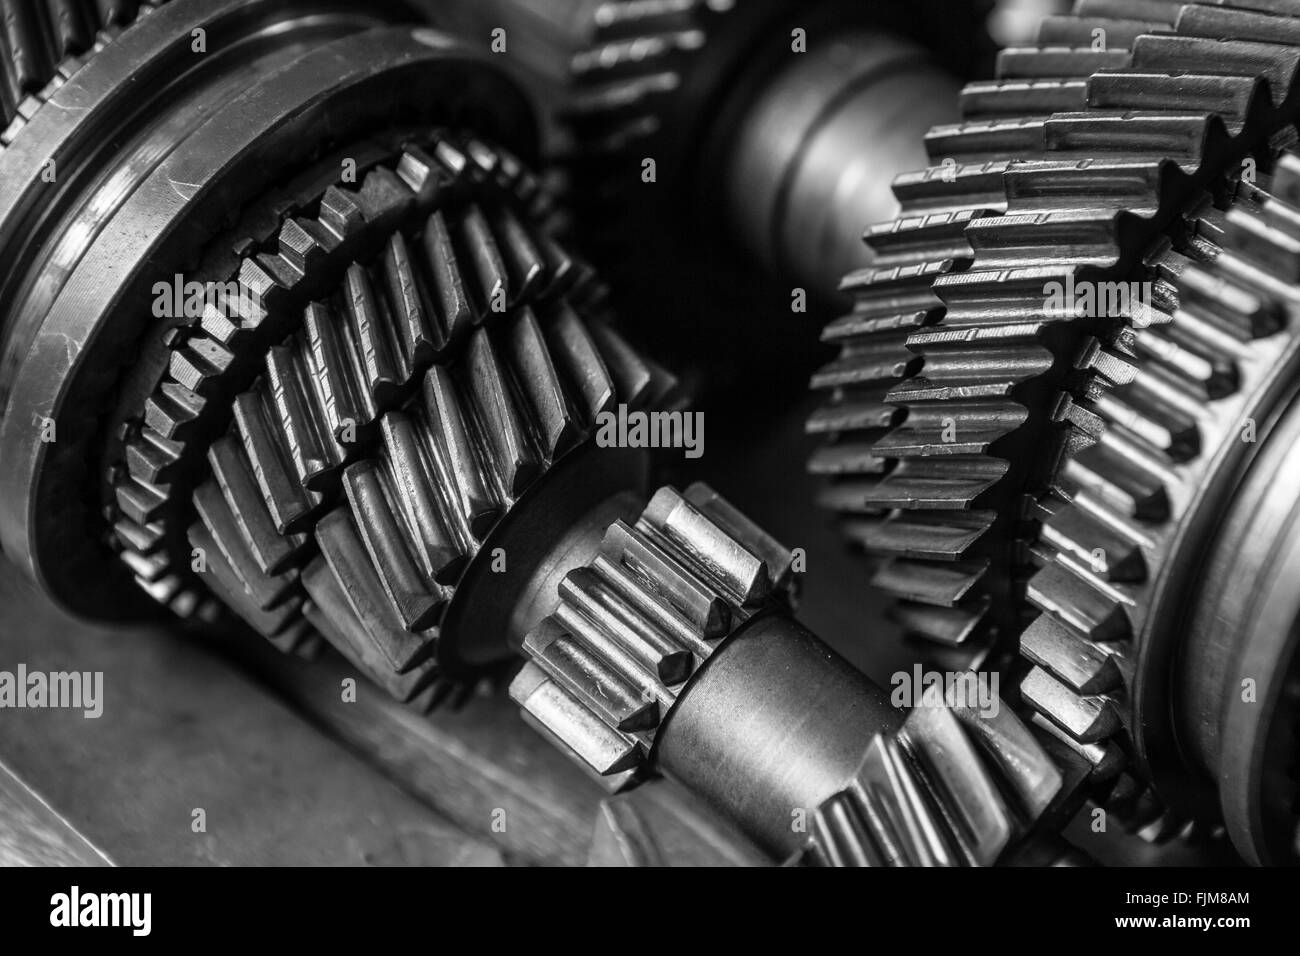 Monochrome image of  car gear cogs in a garage Stock Photo